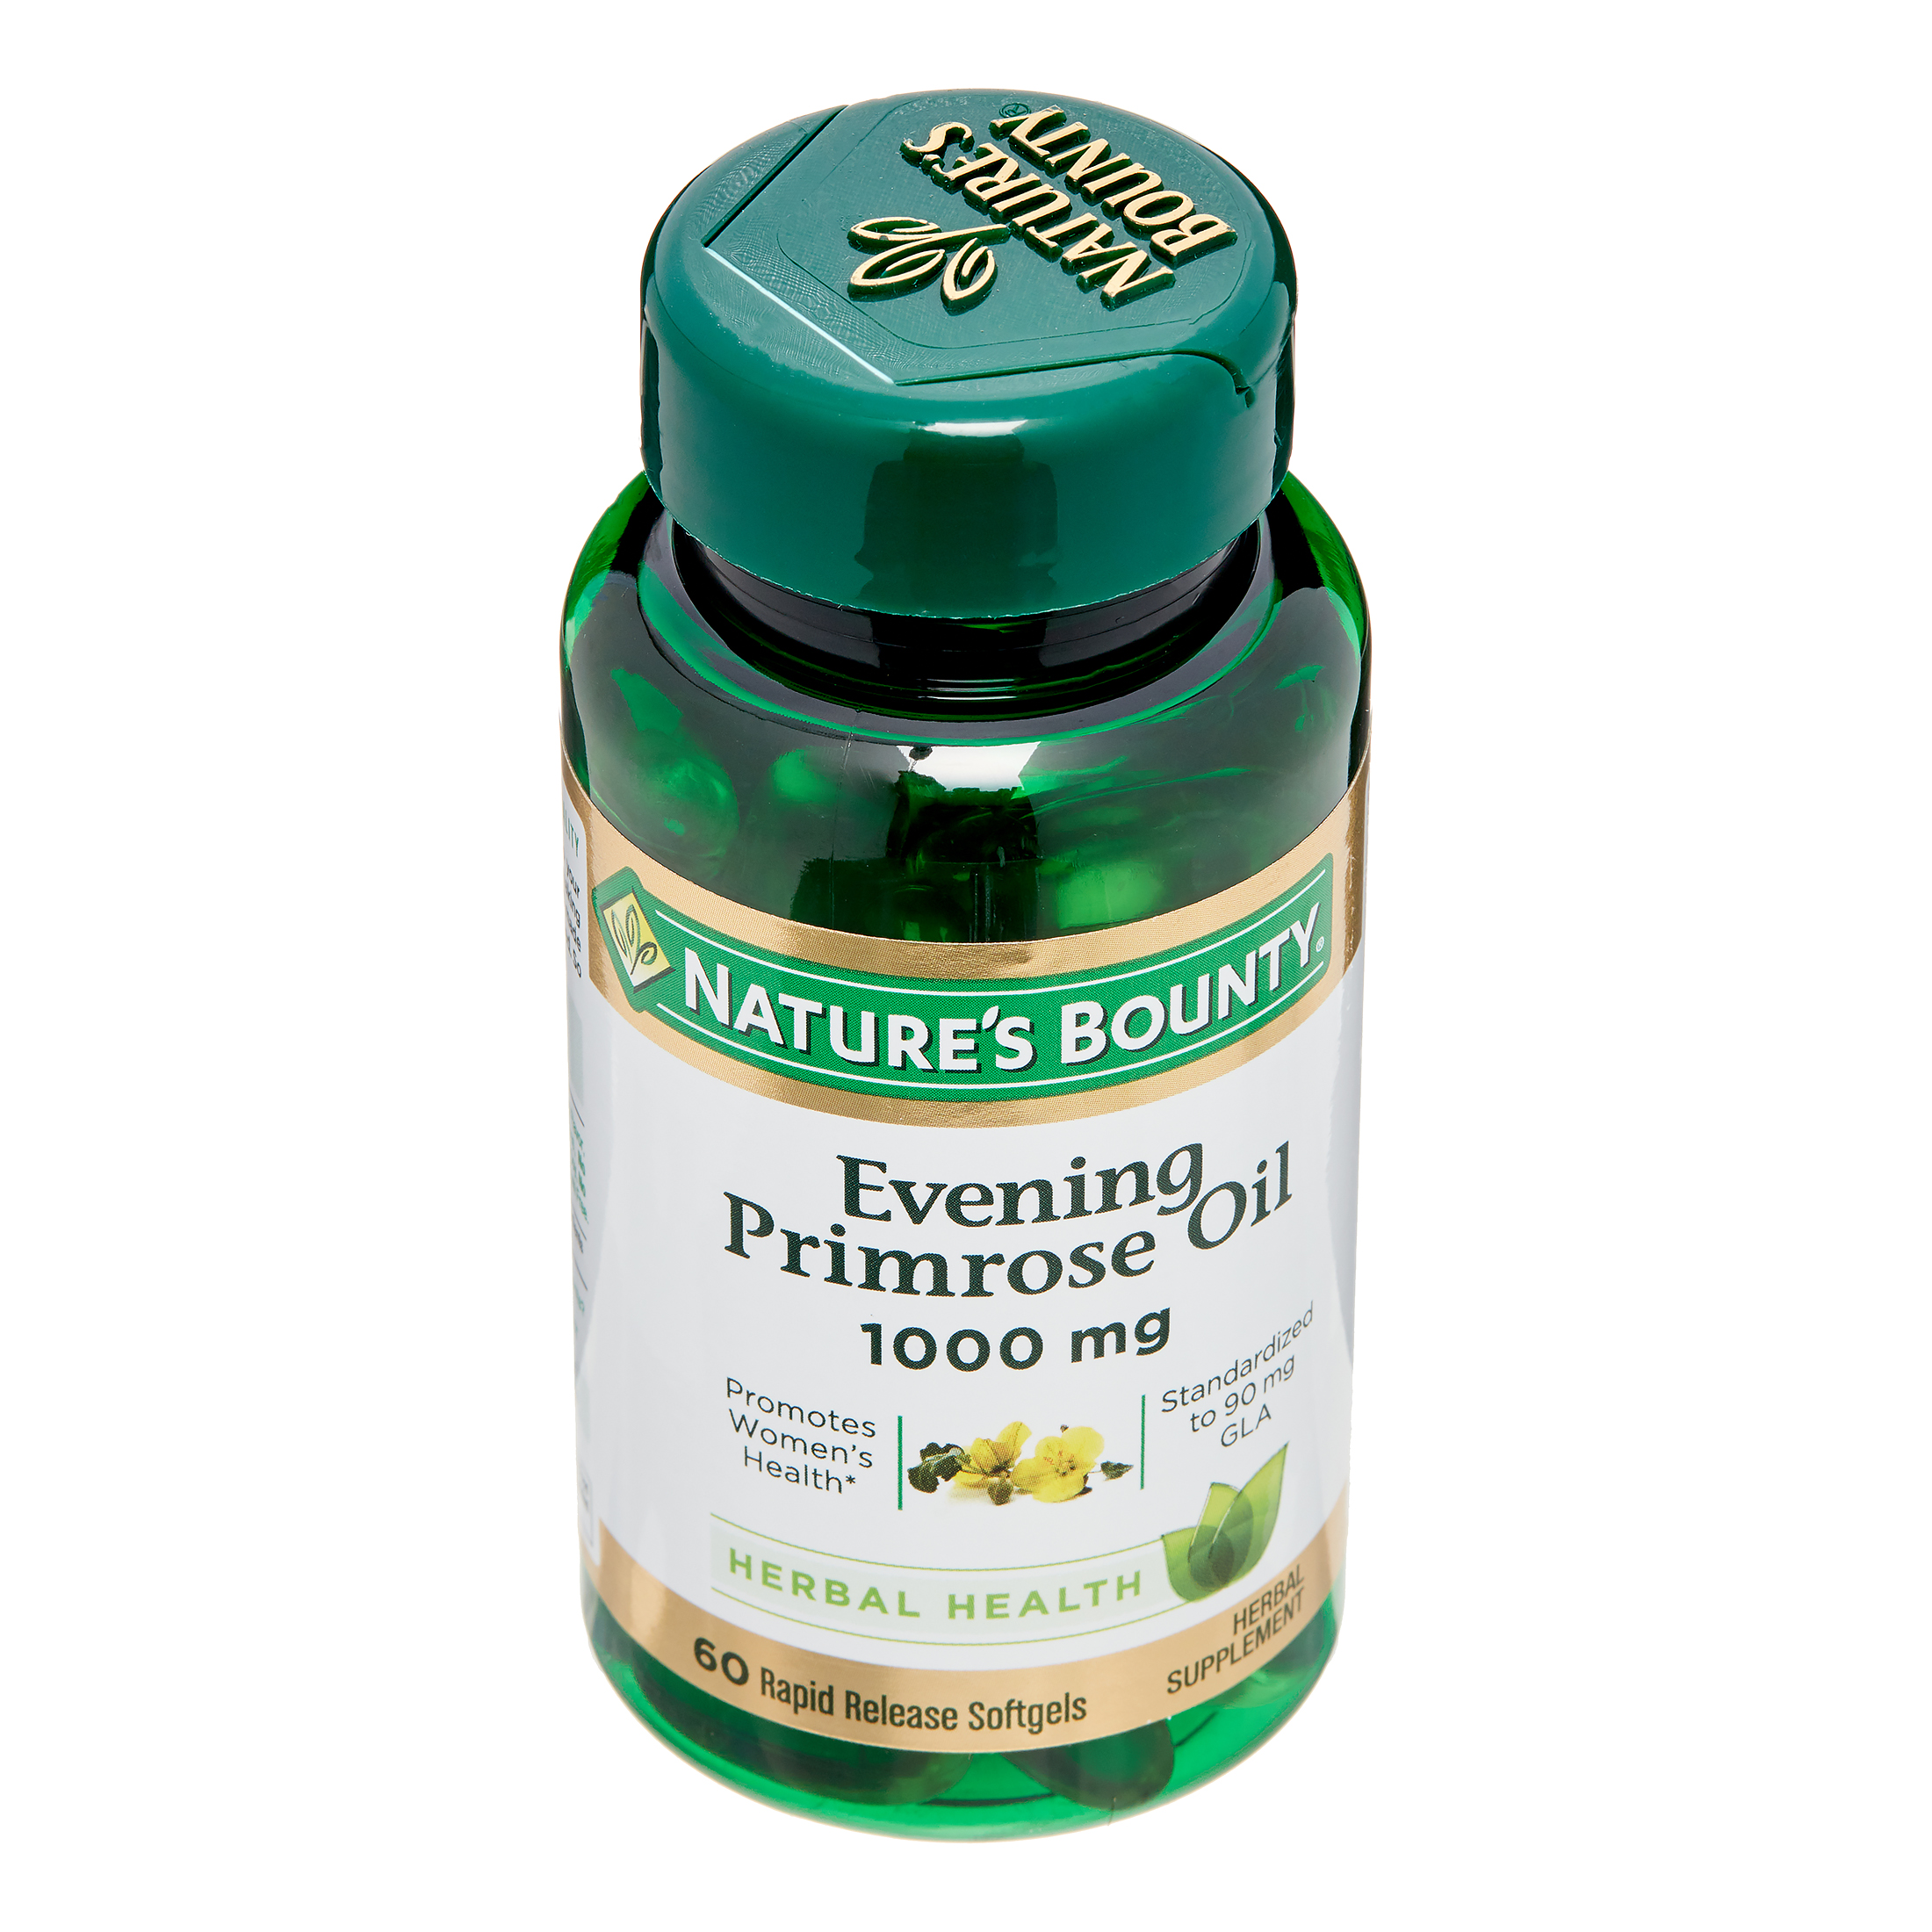 Nature's Bounty Evening Primrose Oil Softgels, Herbal Supplement, 1000 Mg, 60 Ct - image 4 of 8